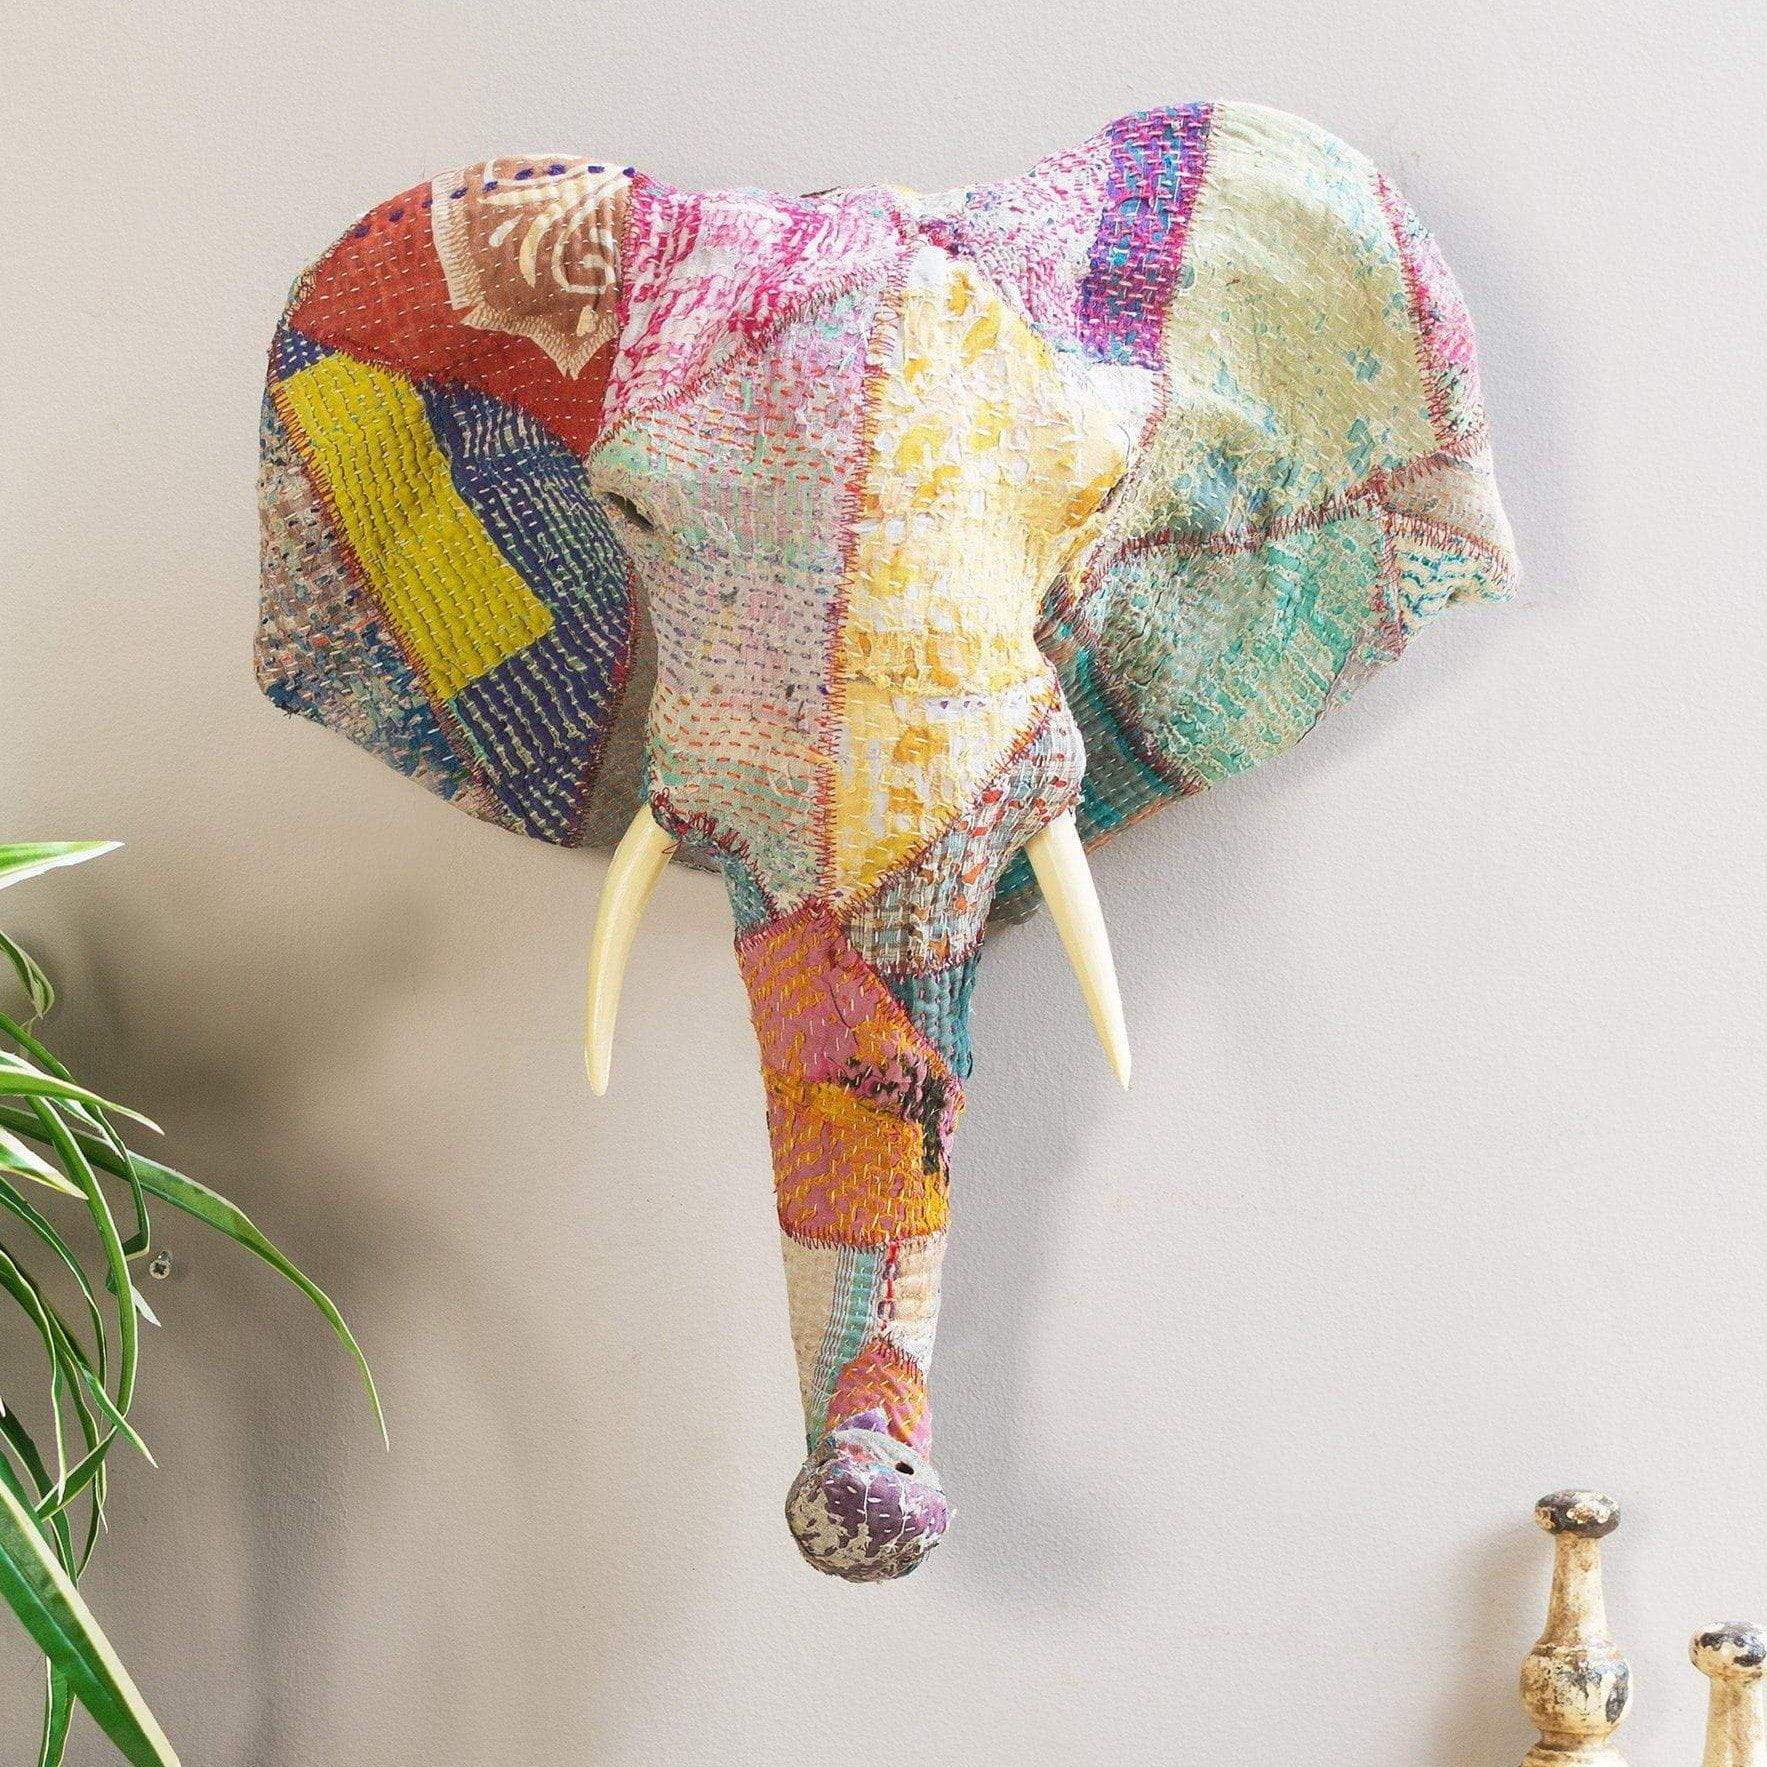 Ian Snow Ltd Embroidered Patchwork Elephant Wall Plaque